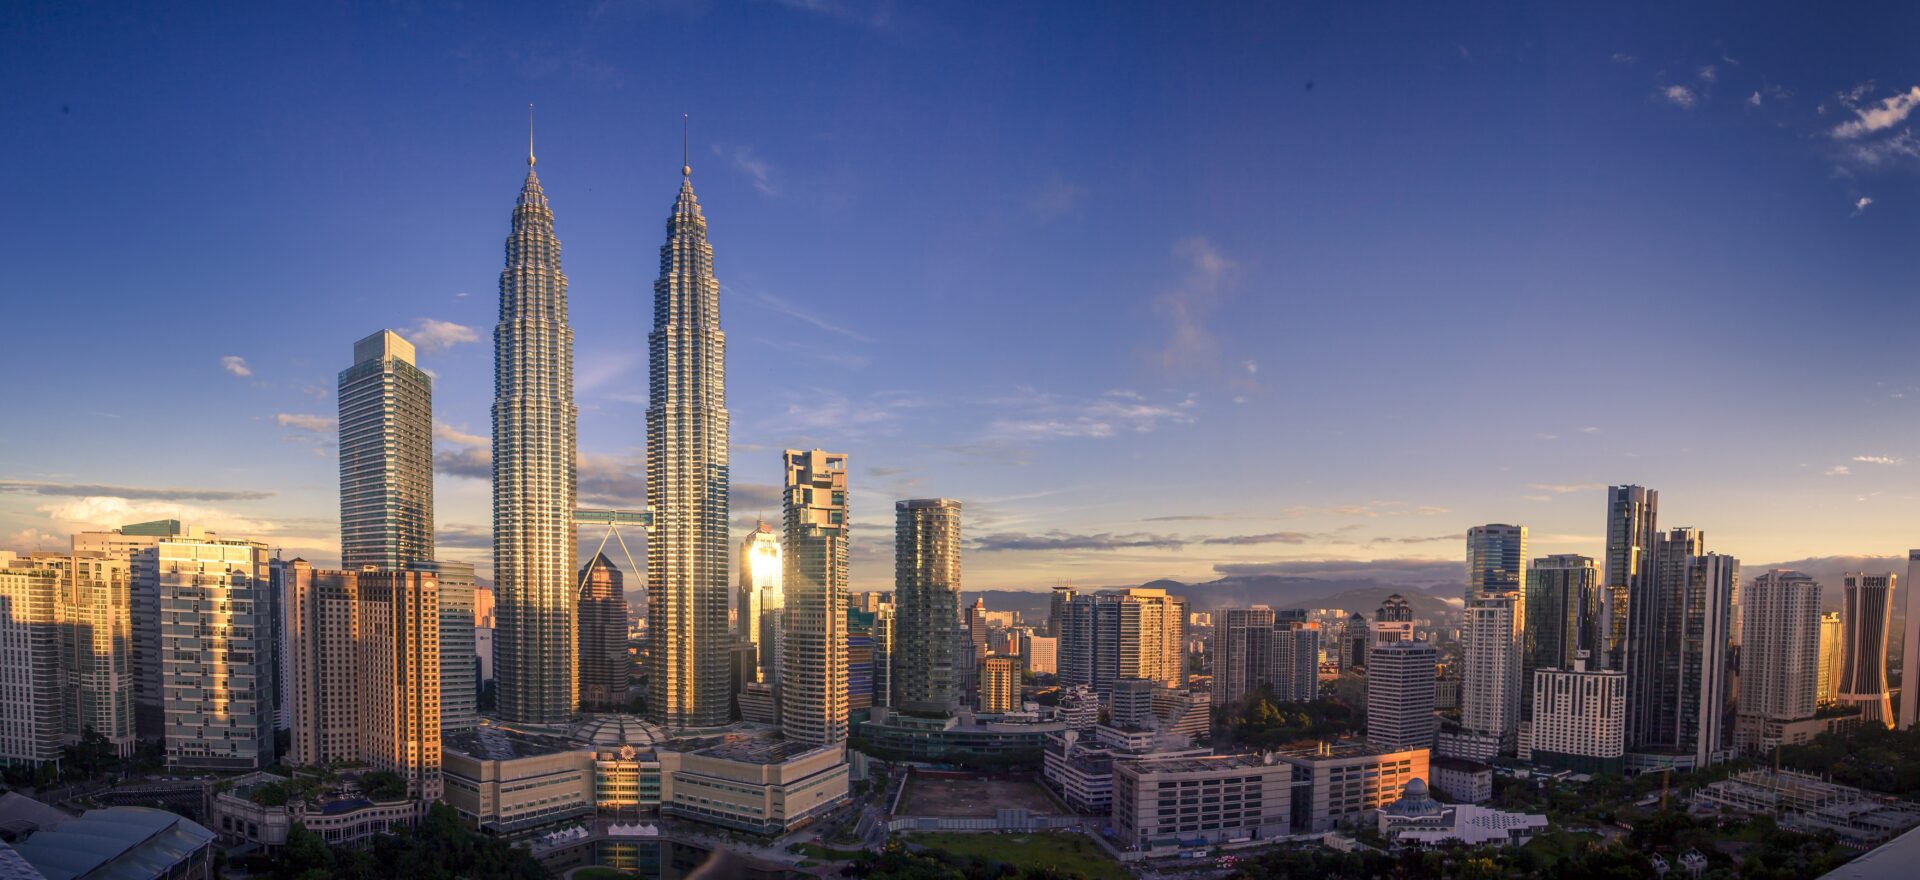 Most Stunning Skylines in the World